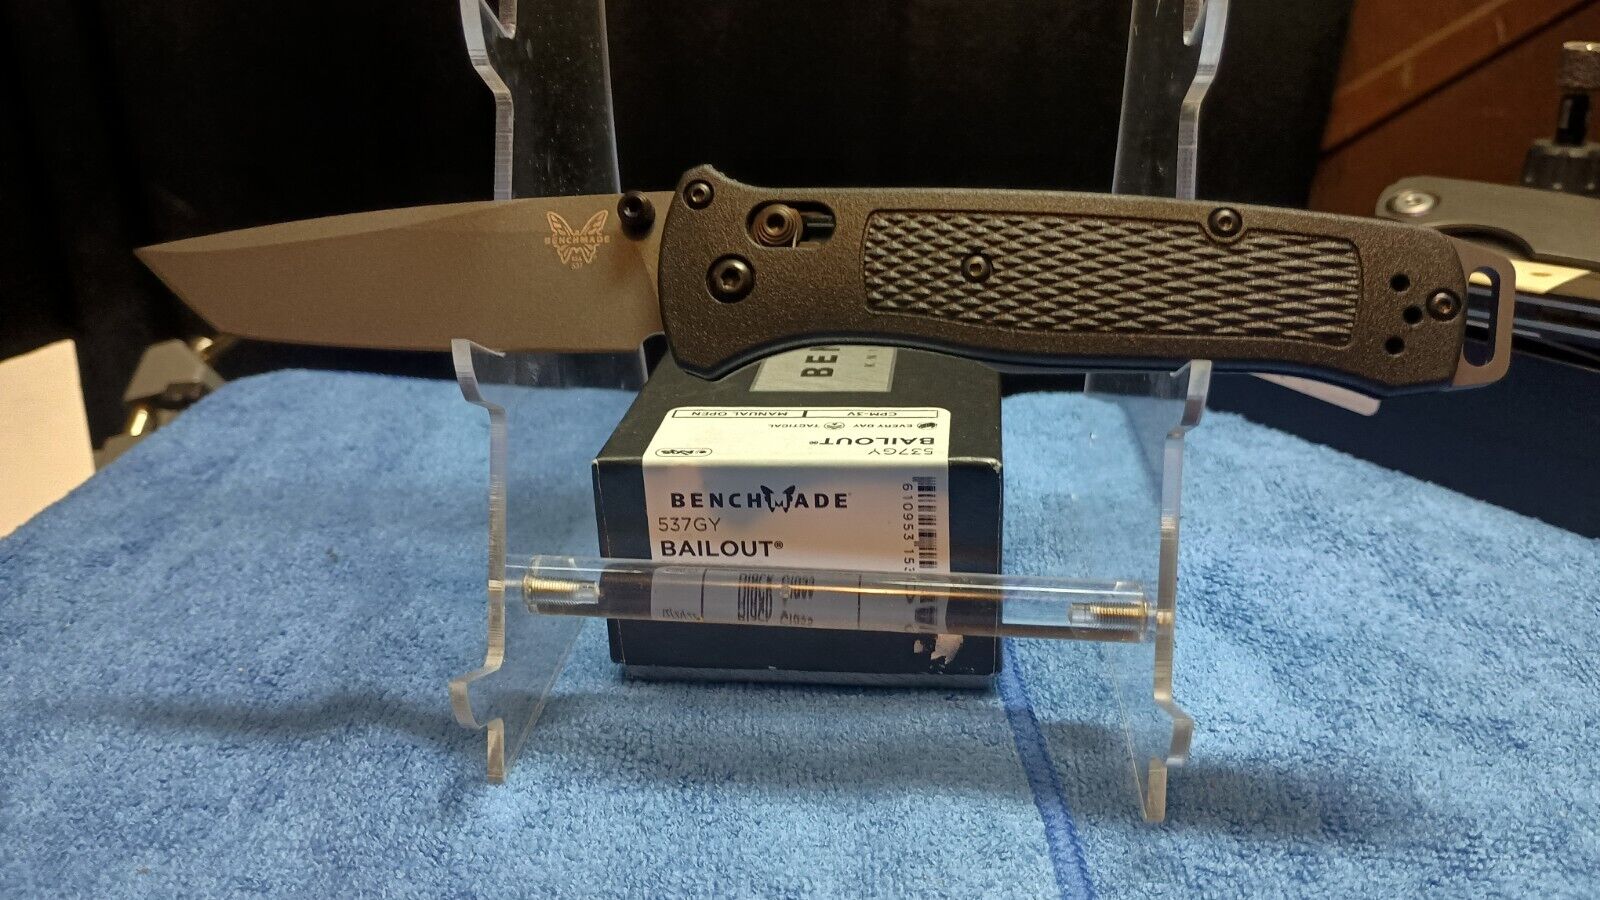 Benchmade 537GY Bailout / Brand New